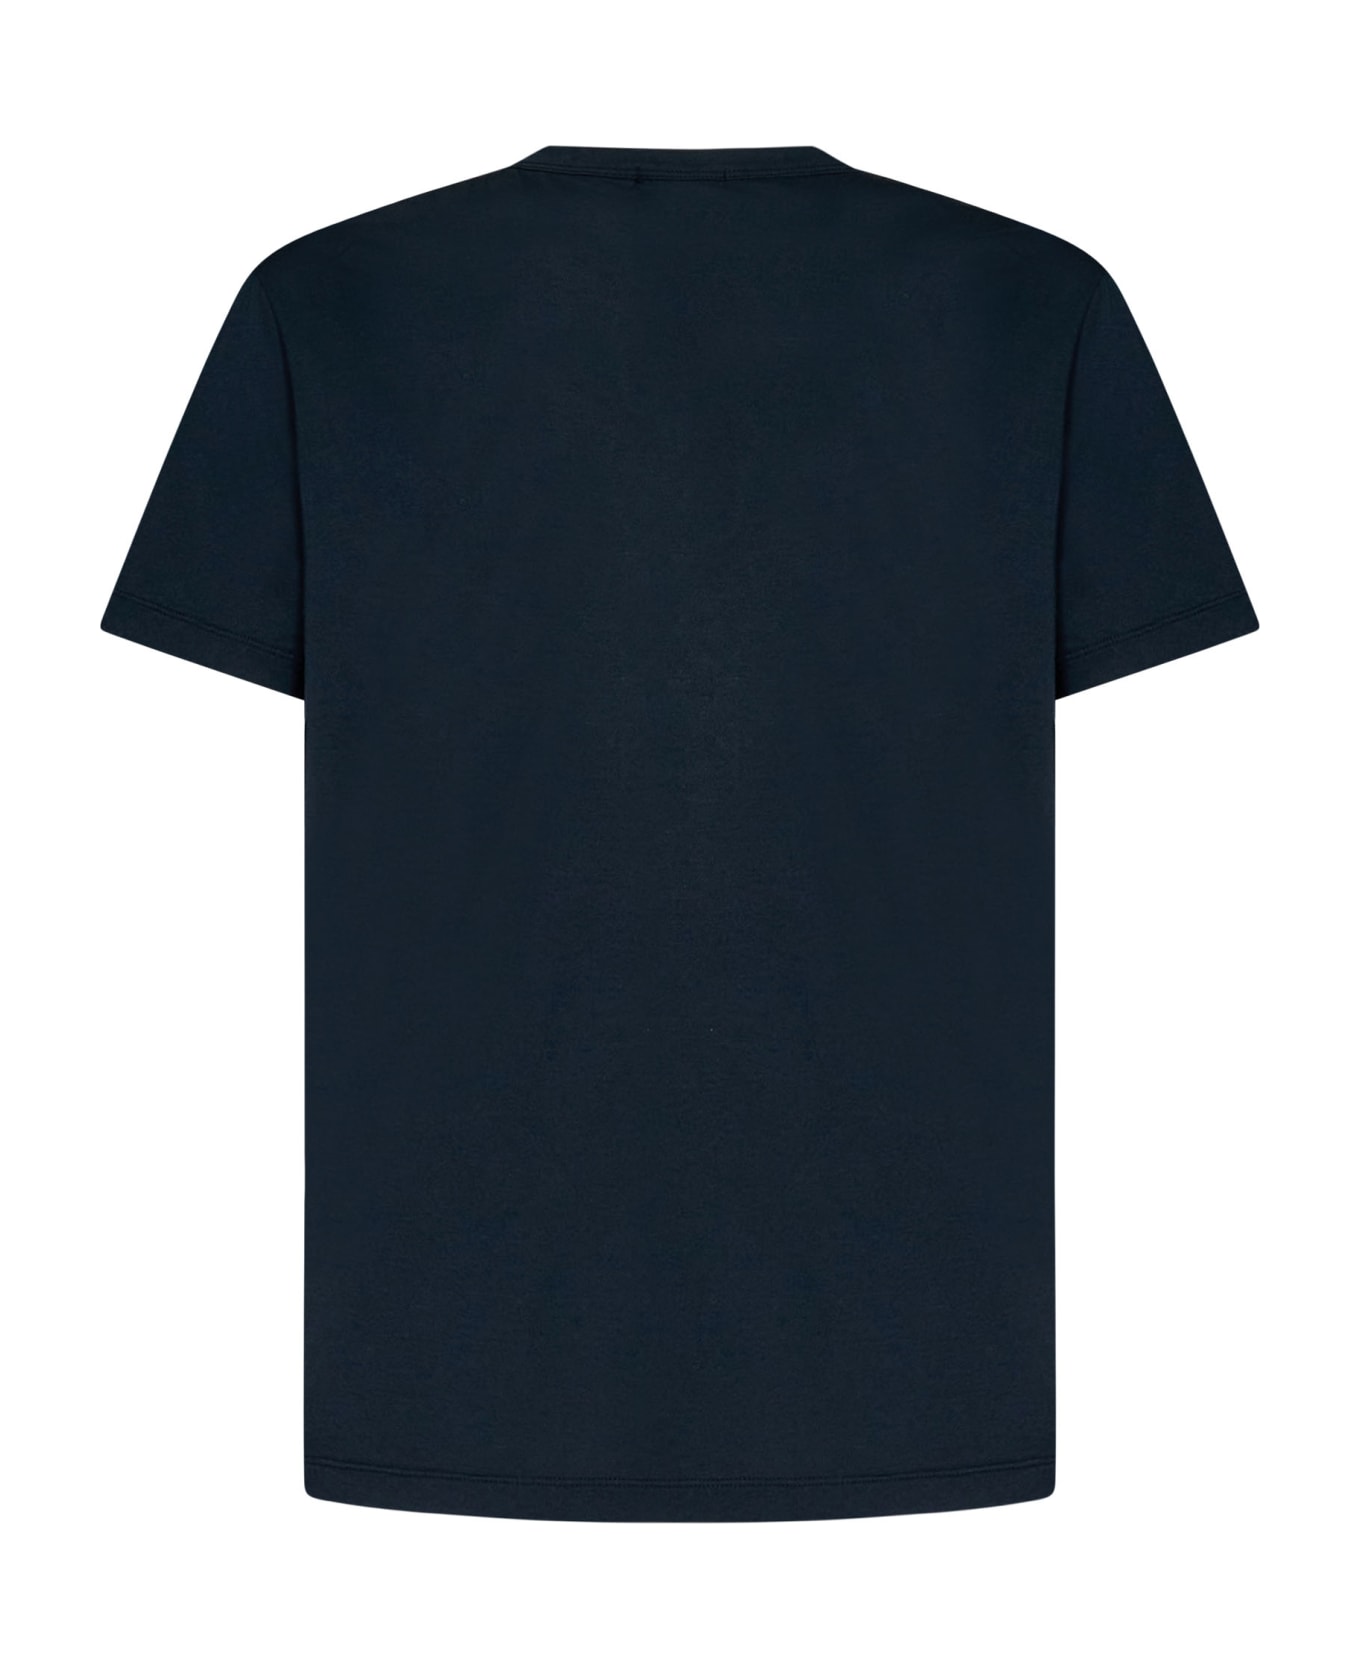 James Perse Luxe Lotus Jersey T-shirt - Blue